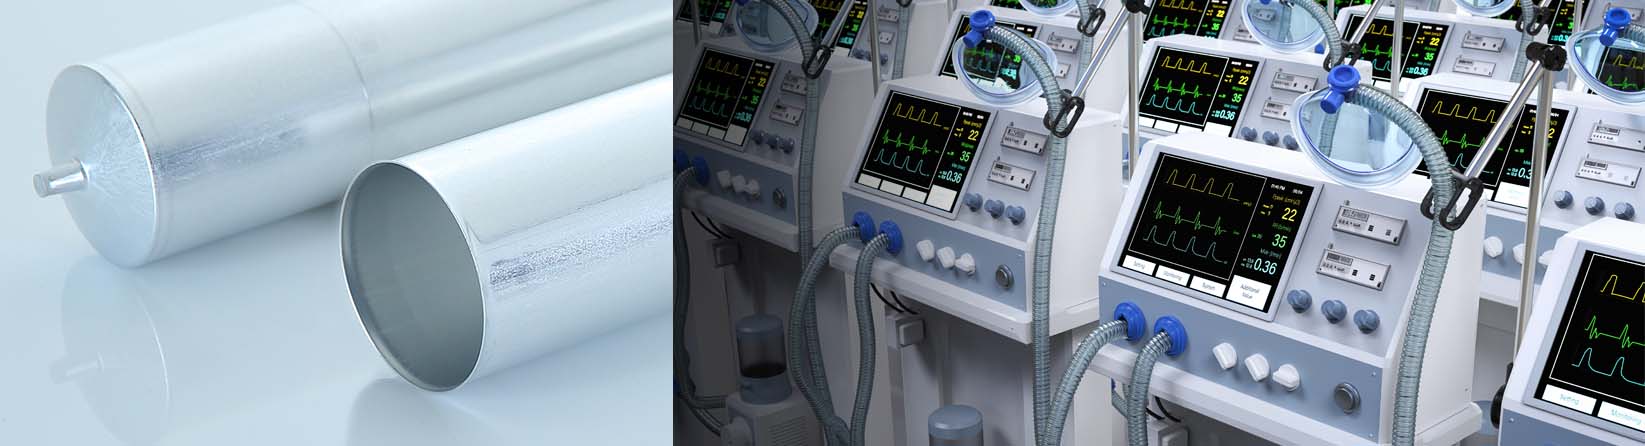 Left impact extruded part. Right medical machines photo.